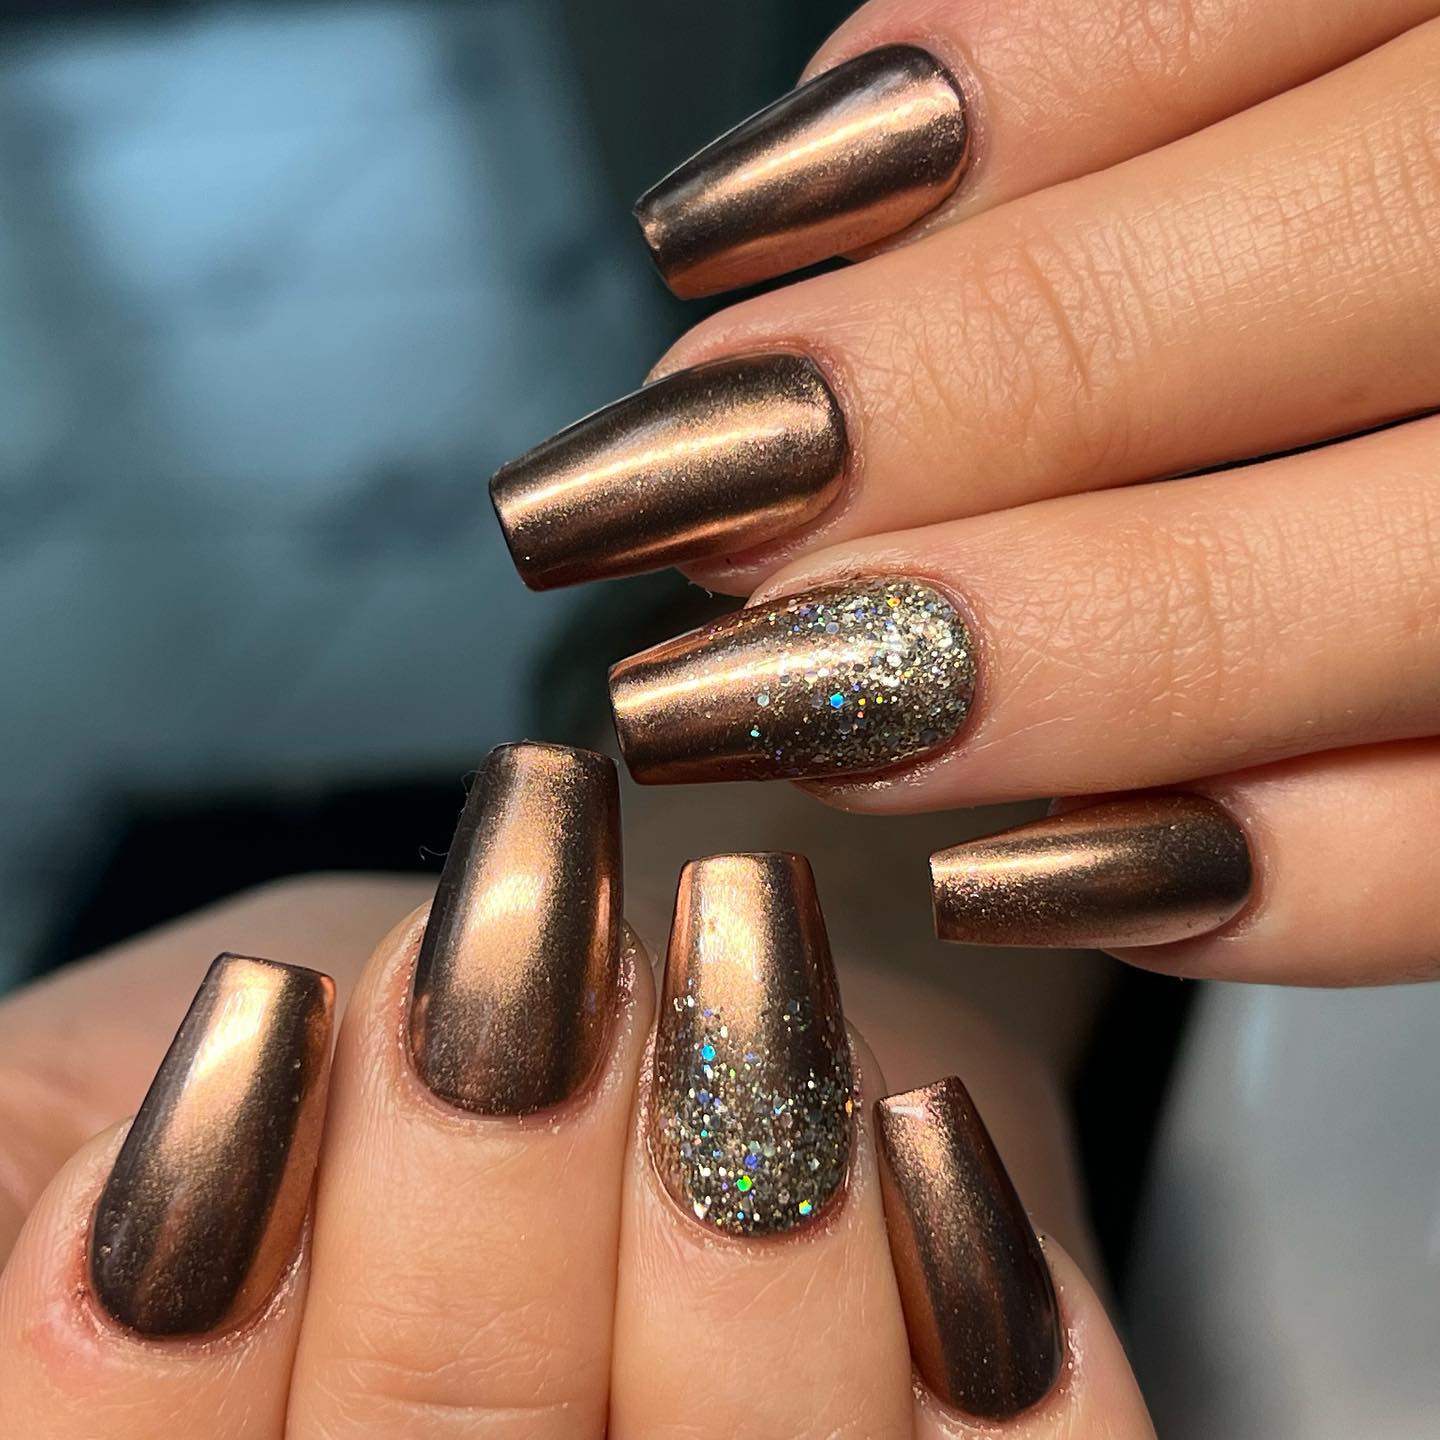 Chrome nails with french ombre details